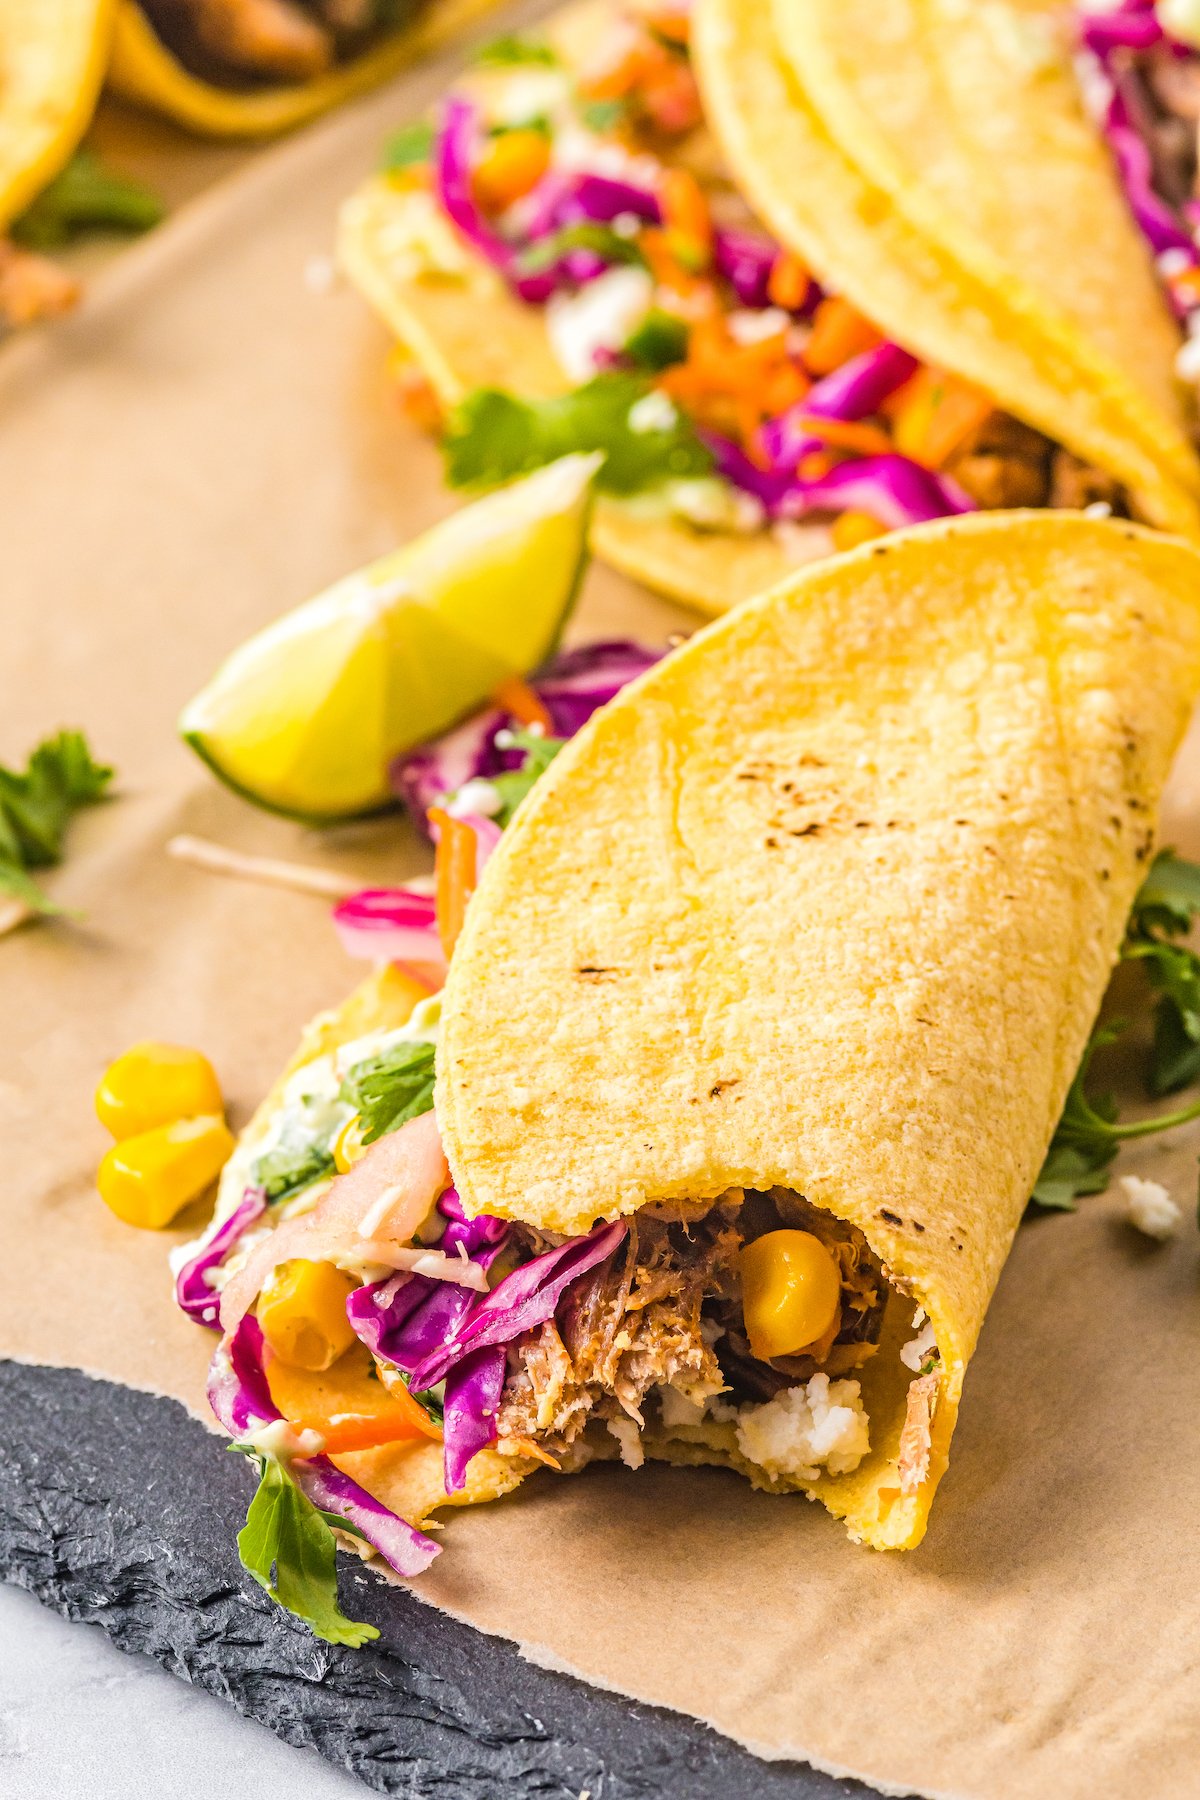 A corn tortilla wrapped around a colorful filling of red cabbage coleslaw, pulled pork, and other ingredients.